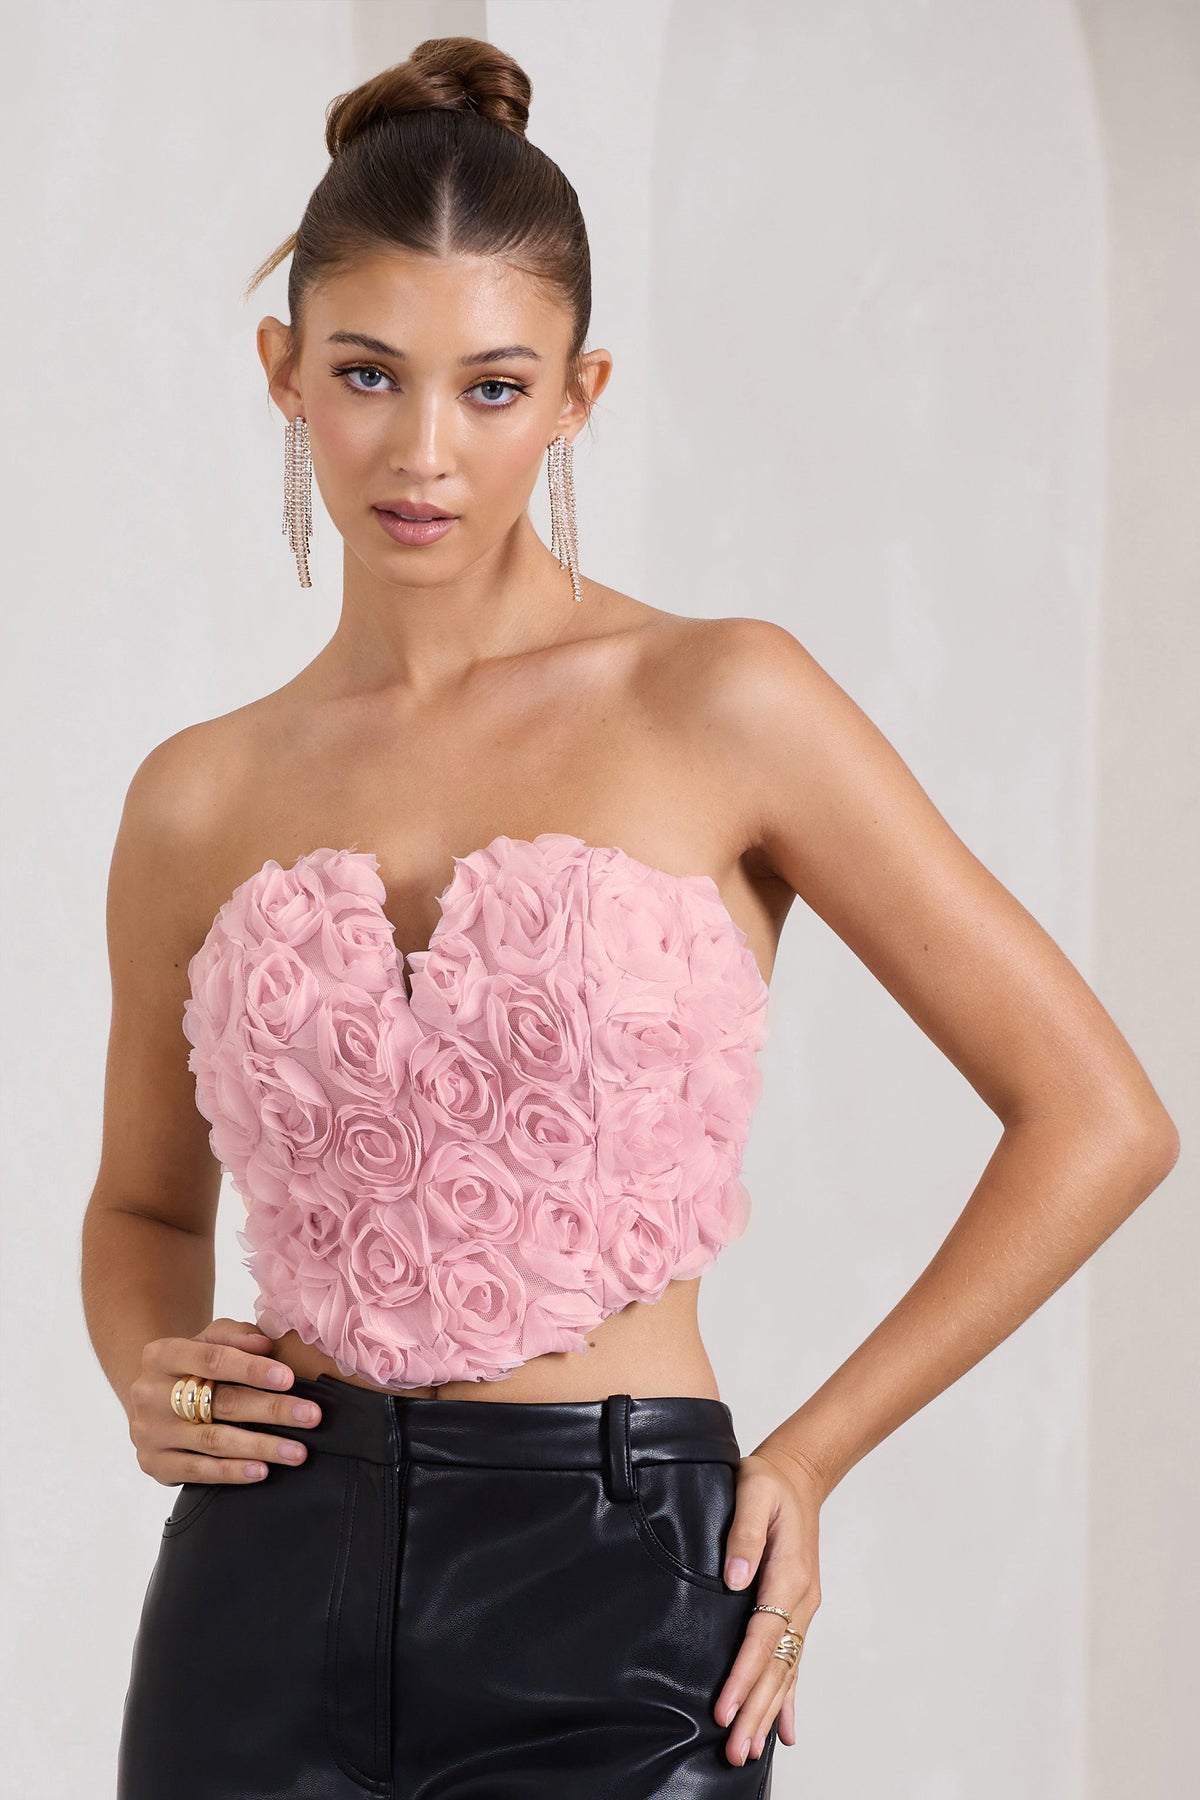 Alicia Blush Pink Floral Mesh Strapless Corset Top